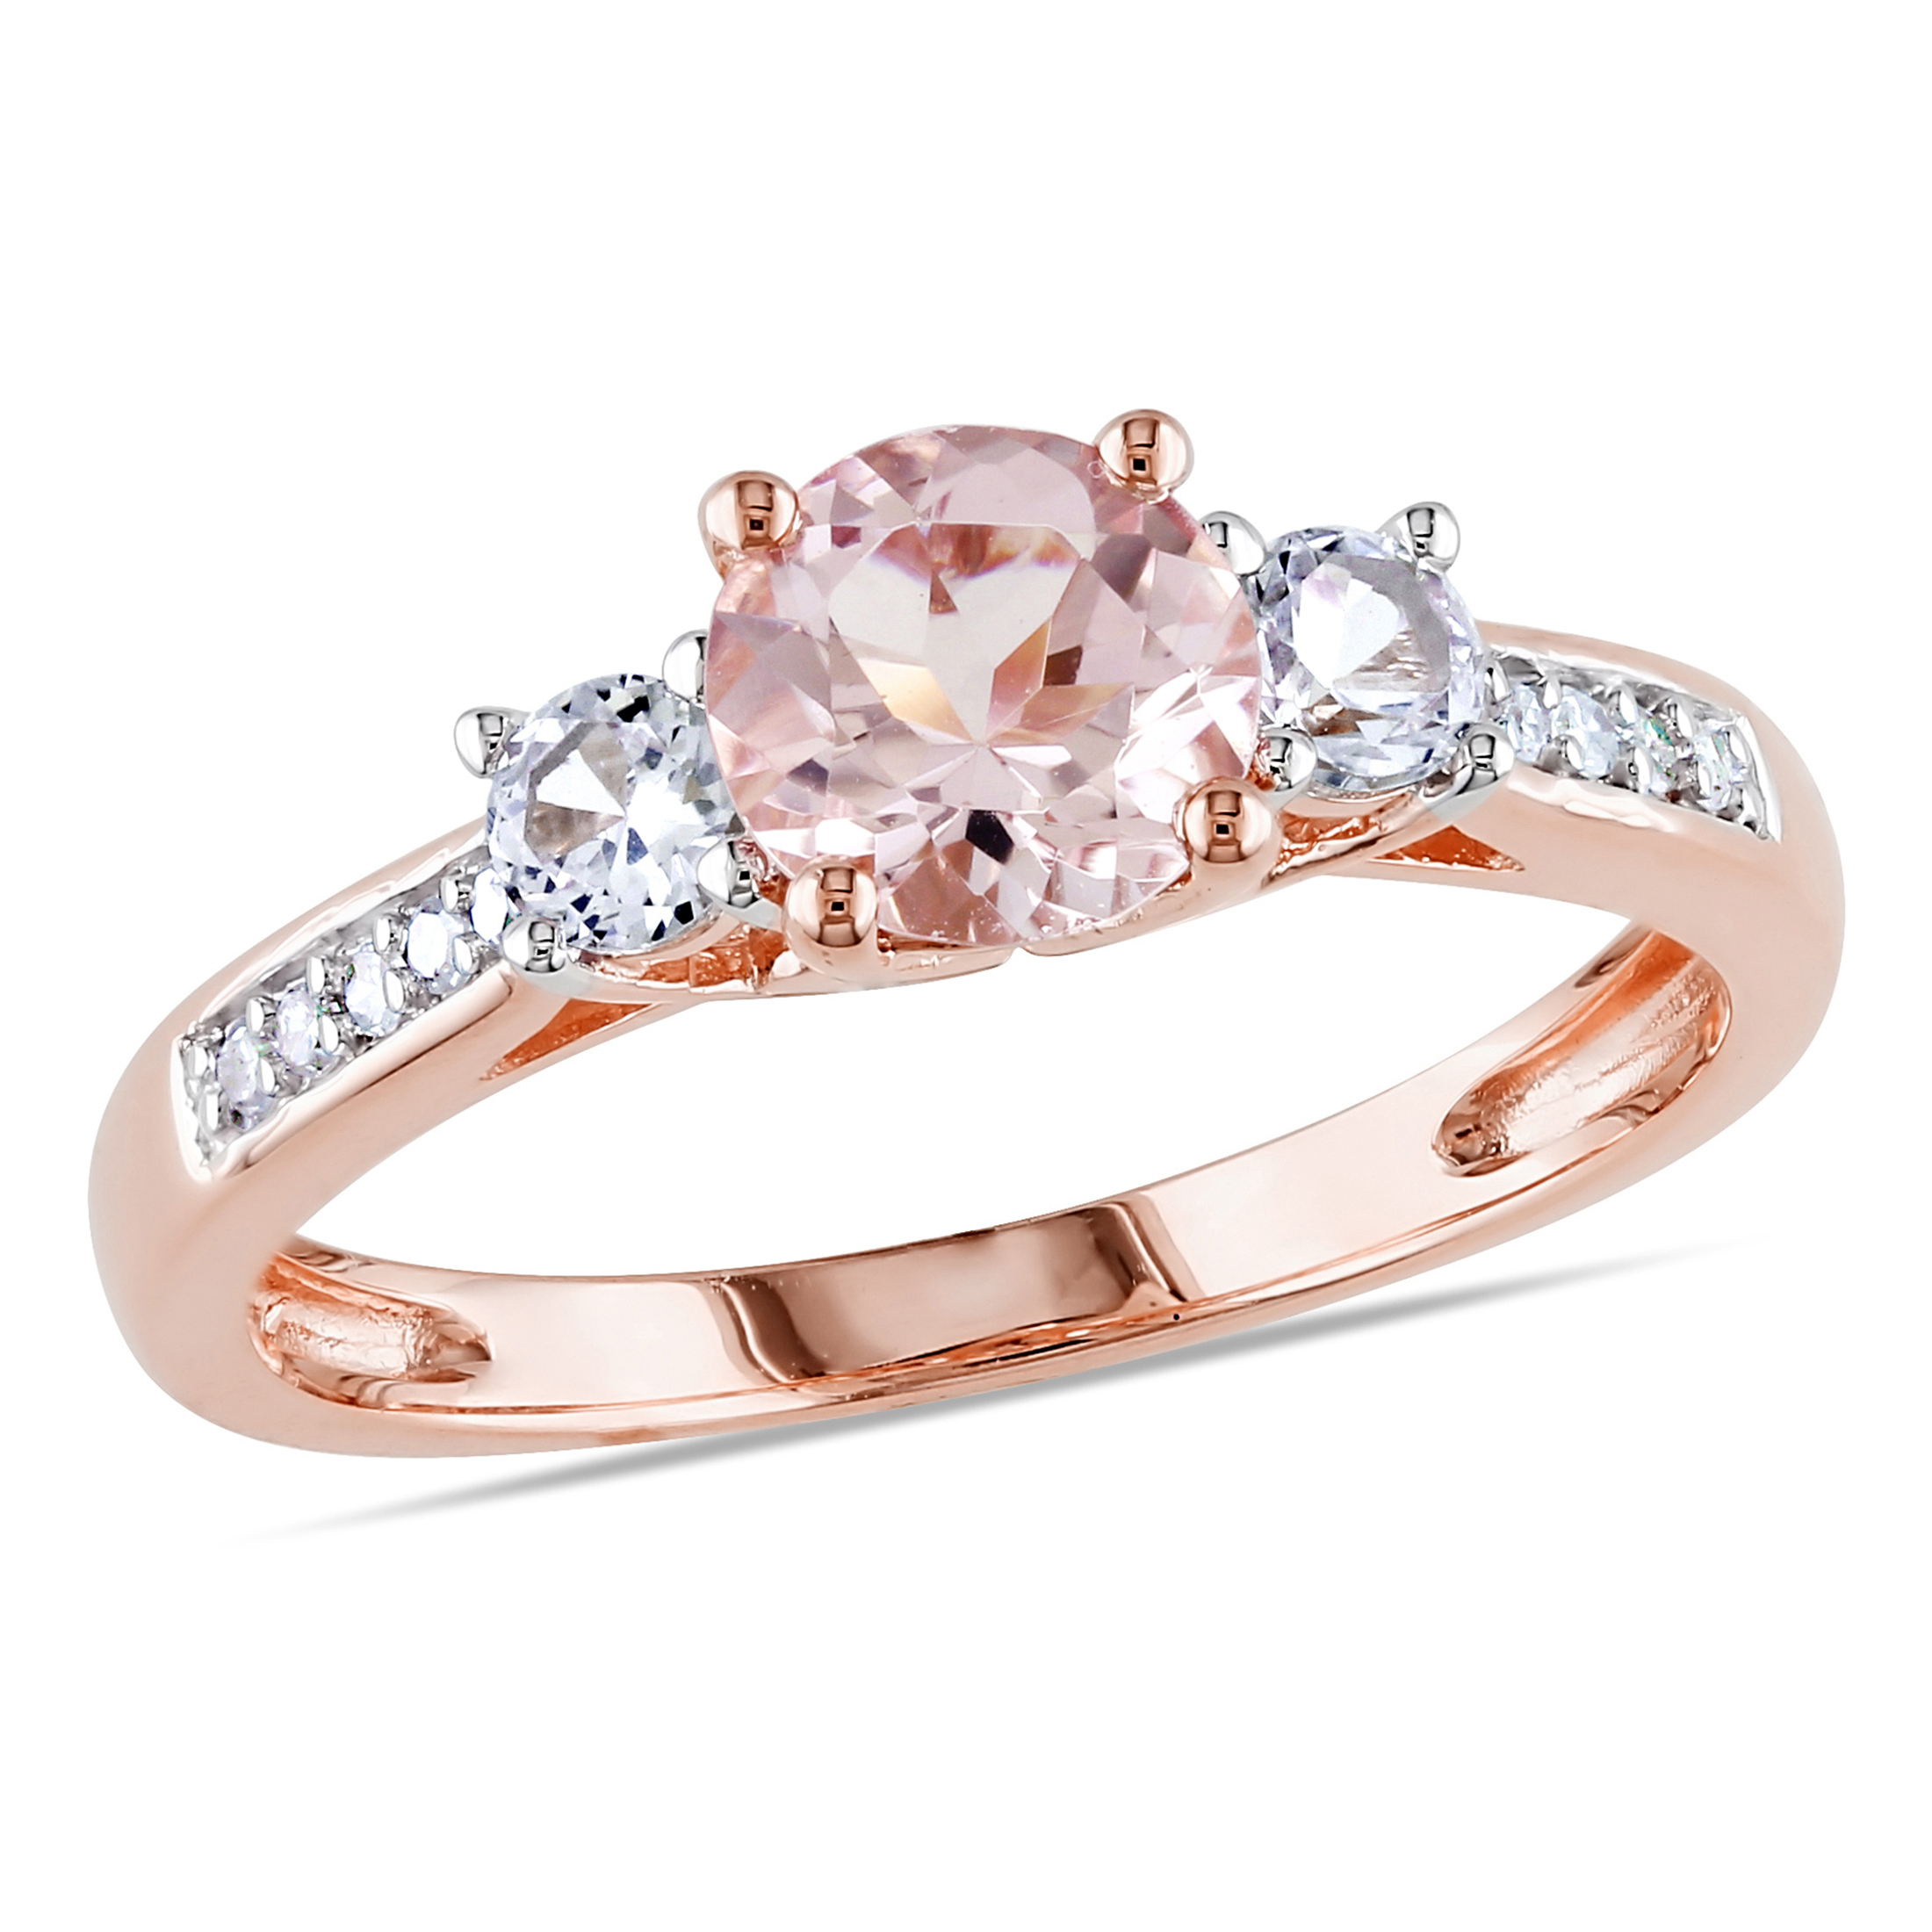 Everly Women's 1-1/7 CT Morganite & Created White Sapphire Diamond Accent 10kt RG Engagement Ring - image 1 of 7